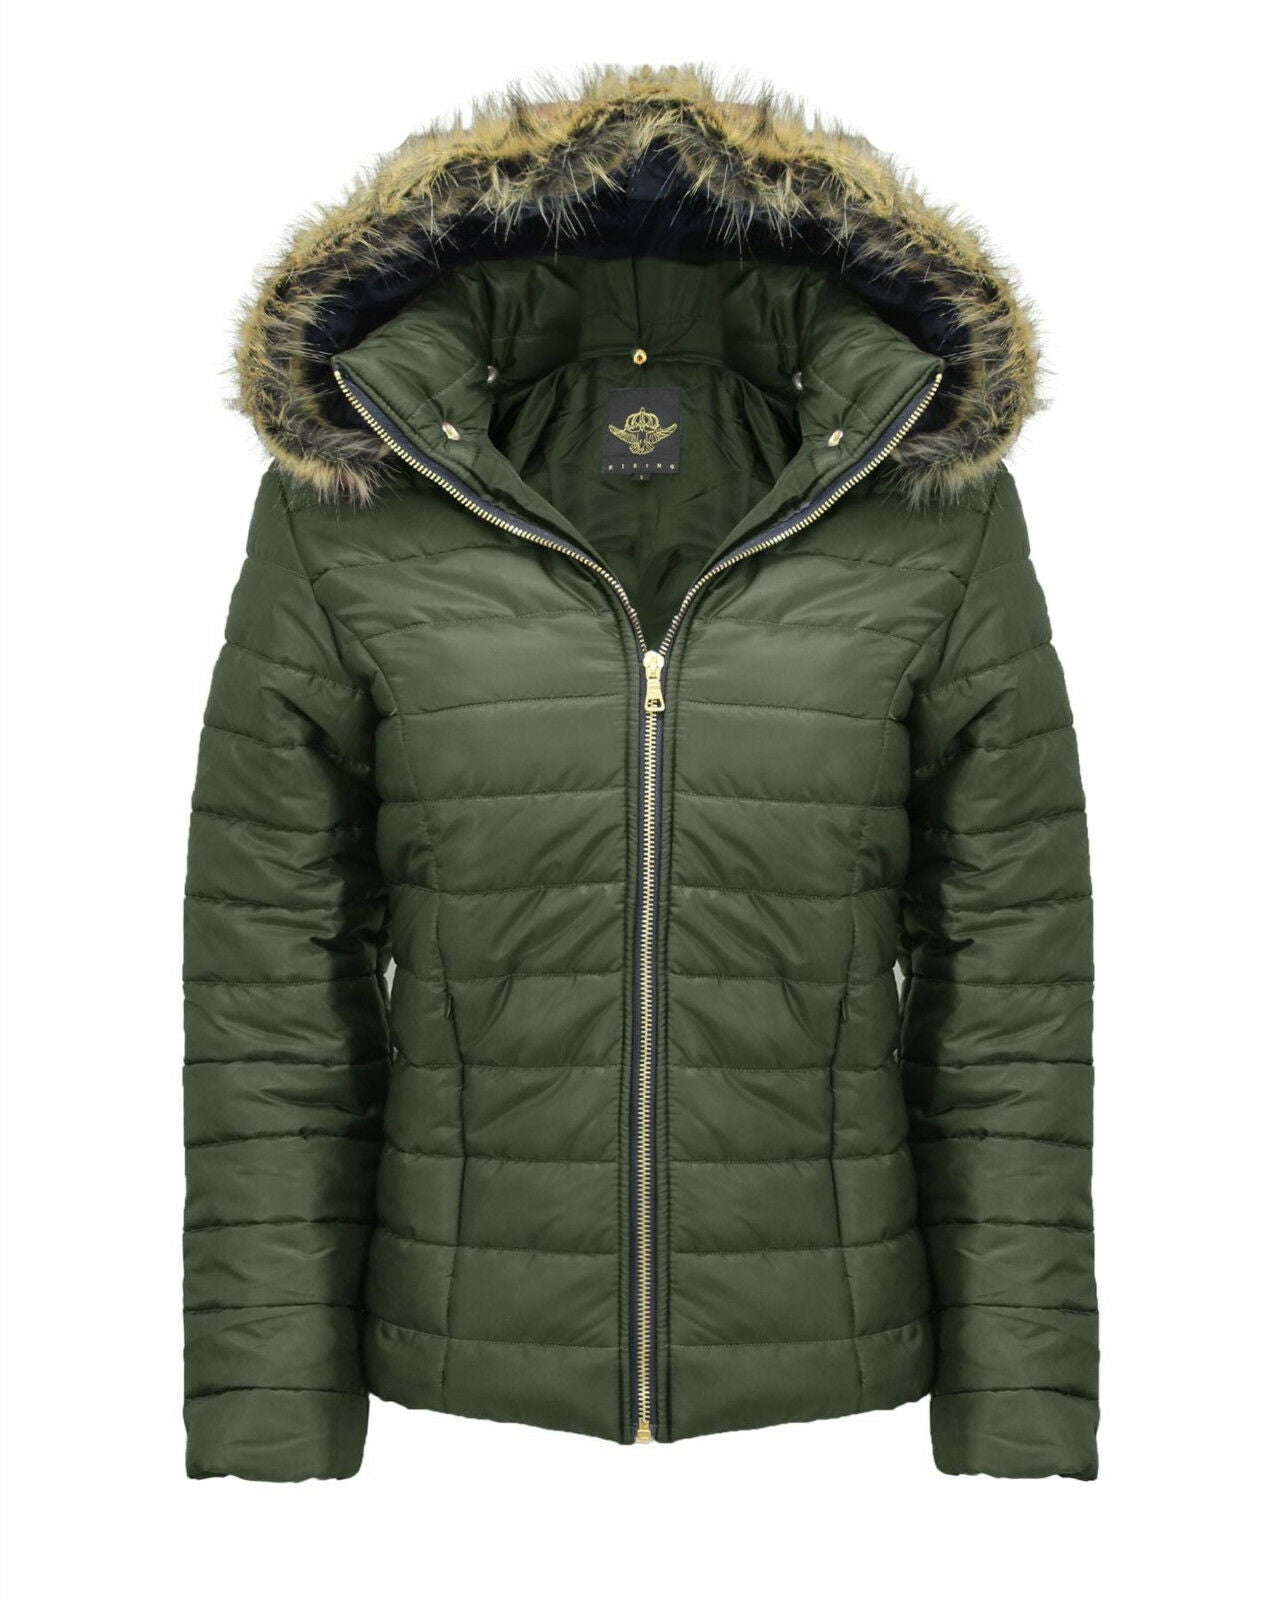 Ladies Khaki Wet Look Short Length Coat. It Has A Detachable Fur Hood 2 Front Zip Pockets And Is a Zip Up Coat. Available In Sizes 8-14.